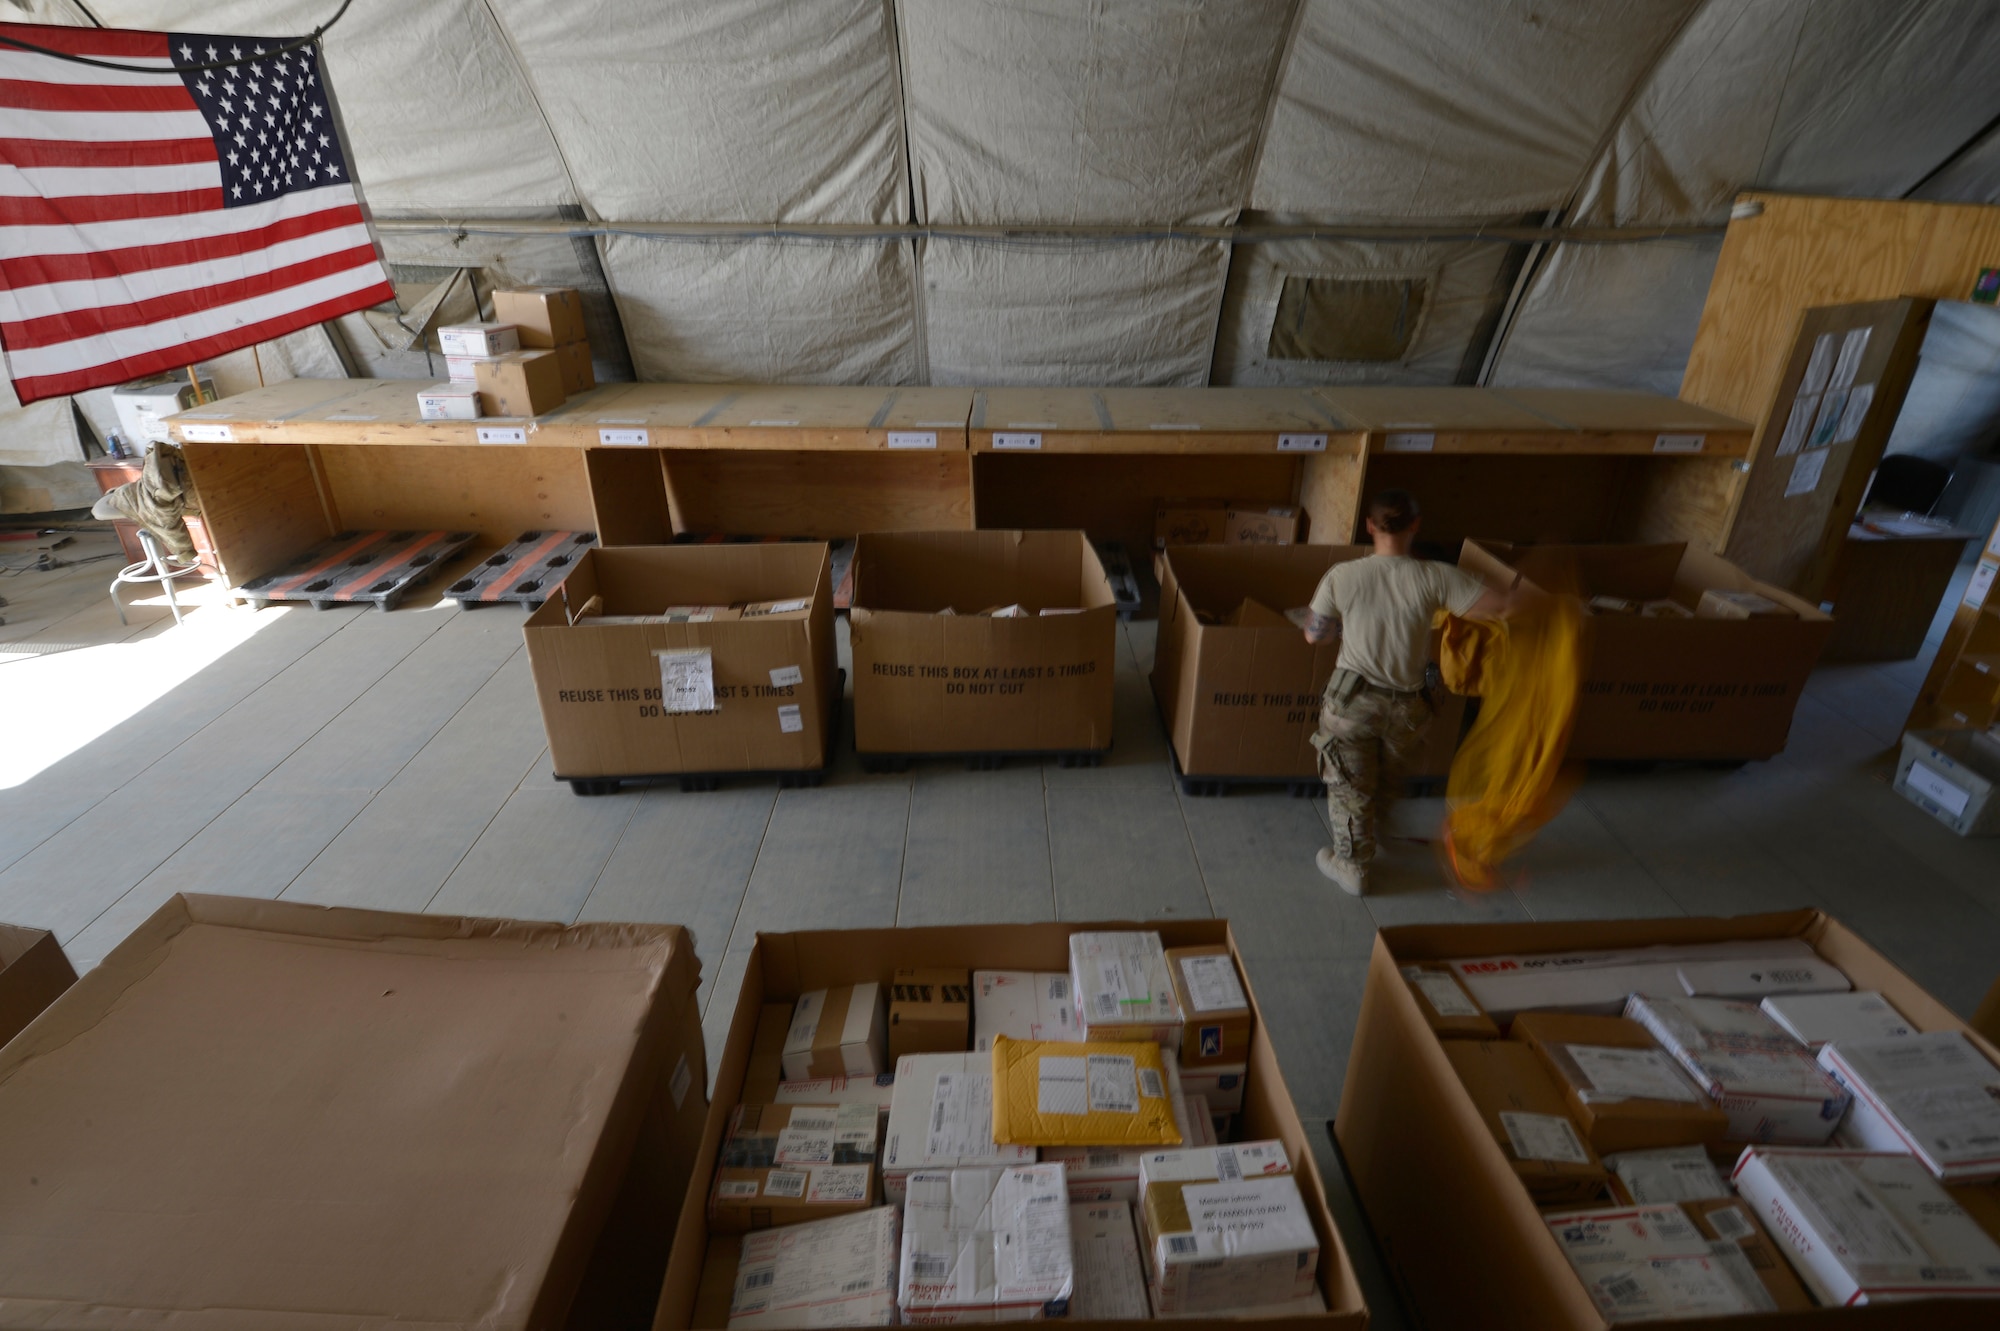 U.S. Air Force Senior Airman Victoria Hill, 455th Expeditionary Communications Squadron mail clerk, sorts through pallets of mail at Bagram Airfield, Afghanistan June 26, 2014.  Hill is responsible for delivering mail to all Airmen in the 455th Expeditionary Wing.  She is deployed from Whiteman Air Force Base and a native of Blanchard, La. (U.S. Air Force photo by Staff Sgt. Evelyn Chavez/Released)